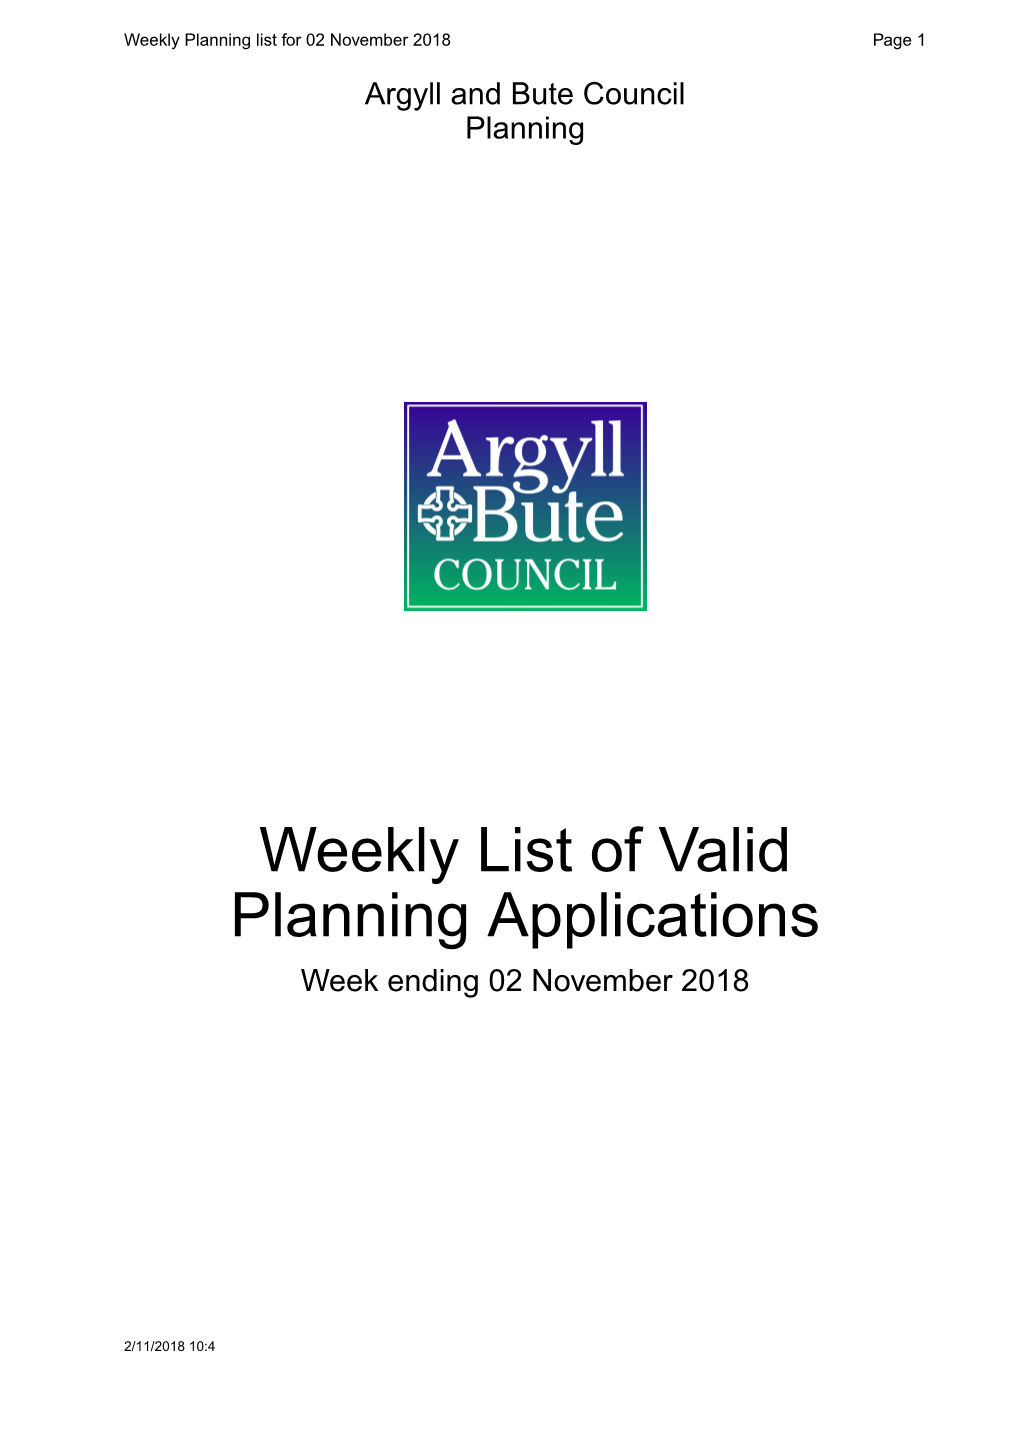 Weekly List of Valid Planning Applications 2Nd November 2018.Pdf